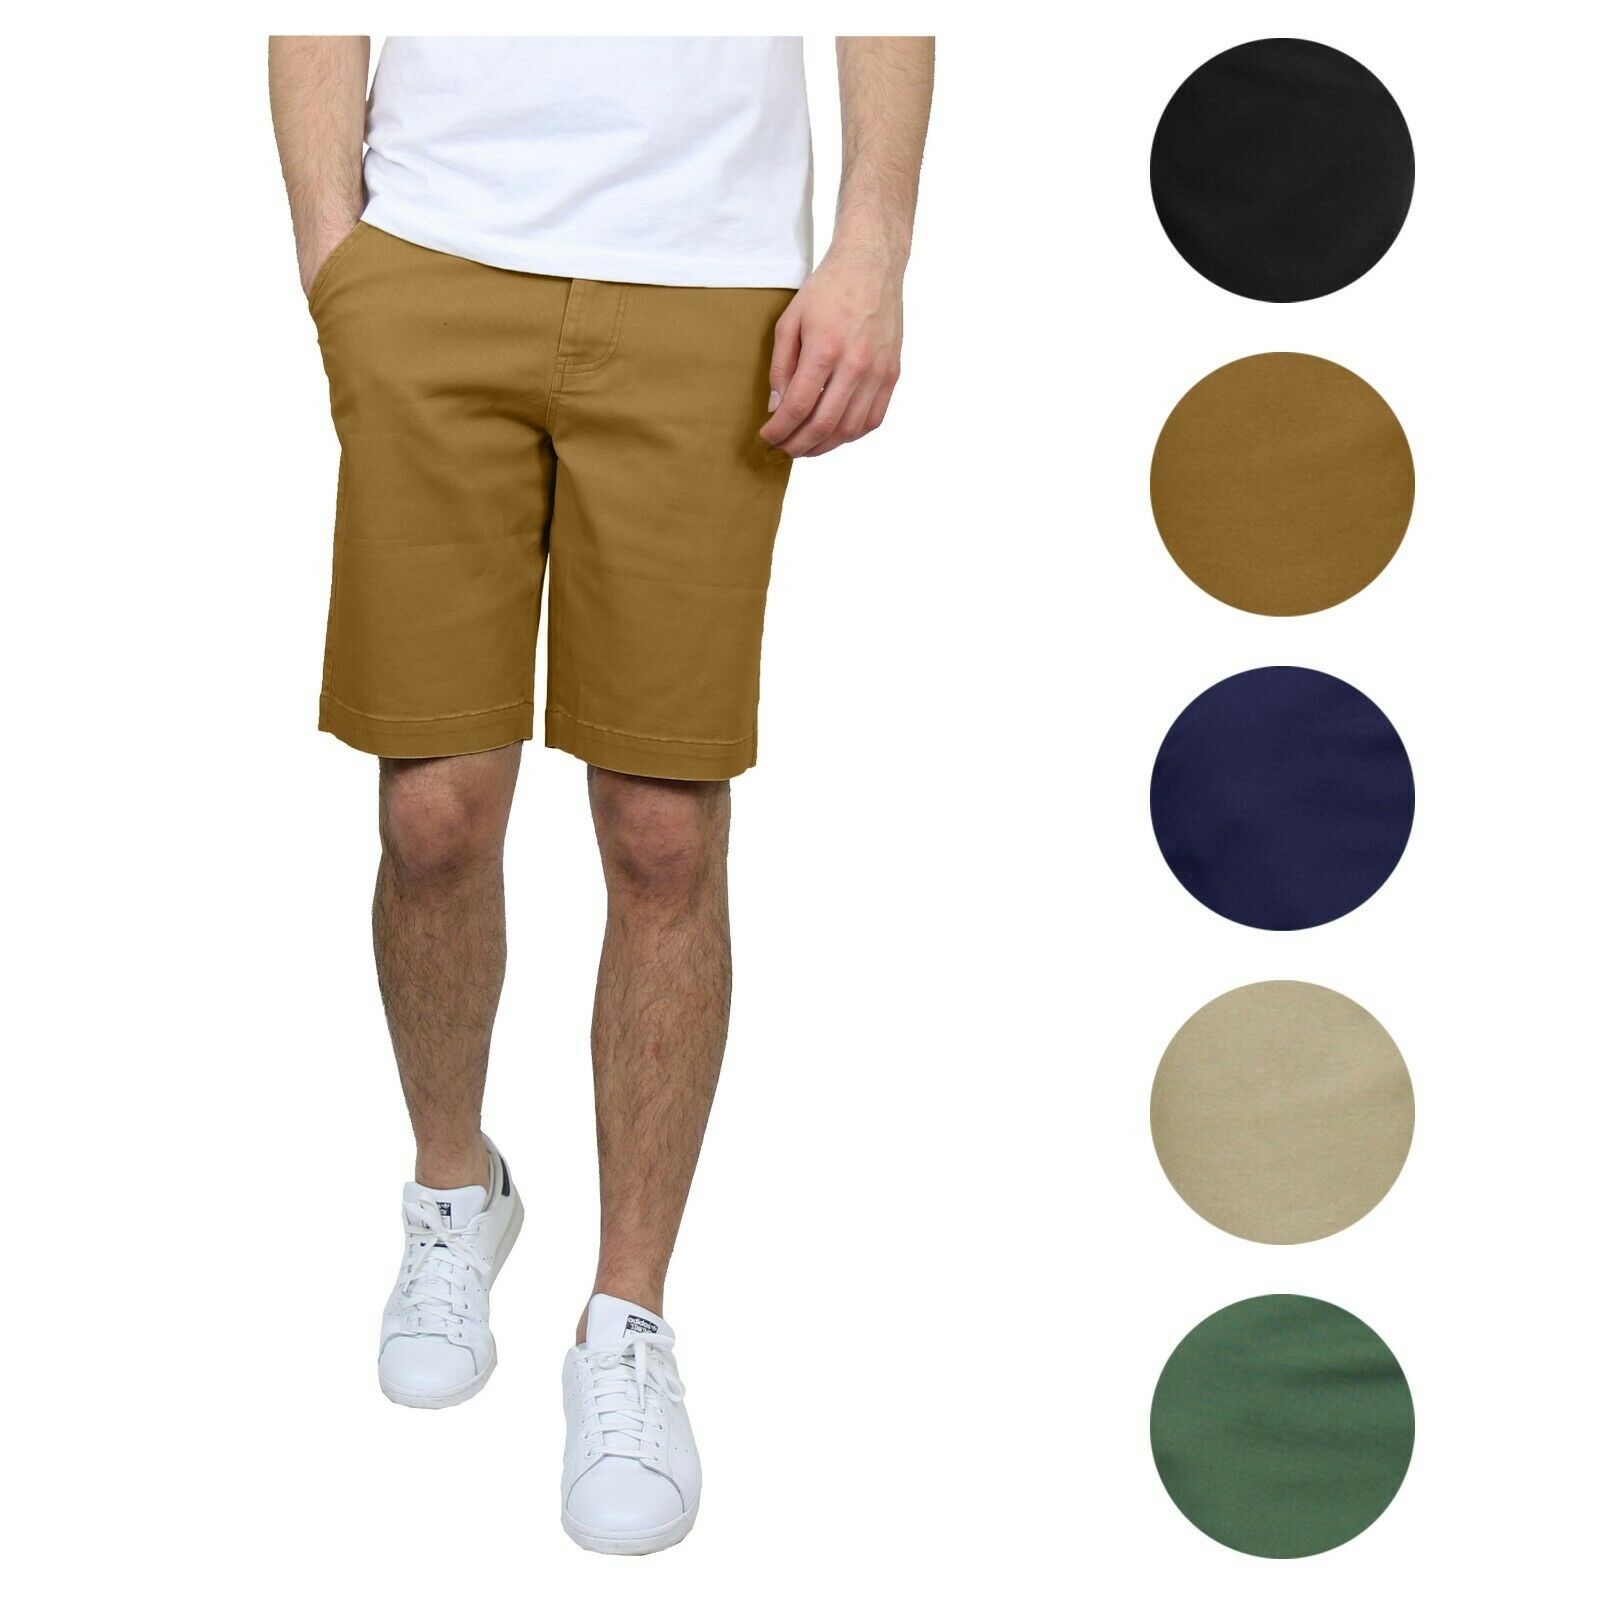 Mens Stretch Chino Shorts Flat Front 5 Pocket Summer Casual Slim Fit New 30-42